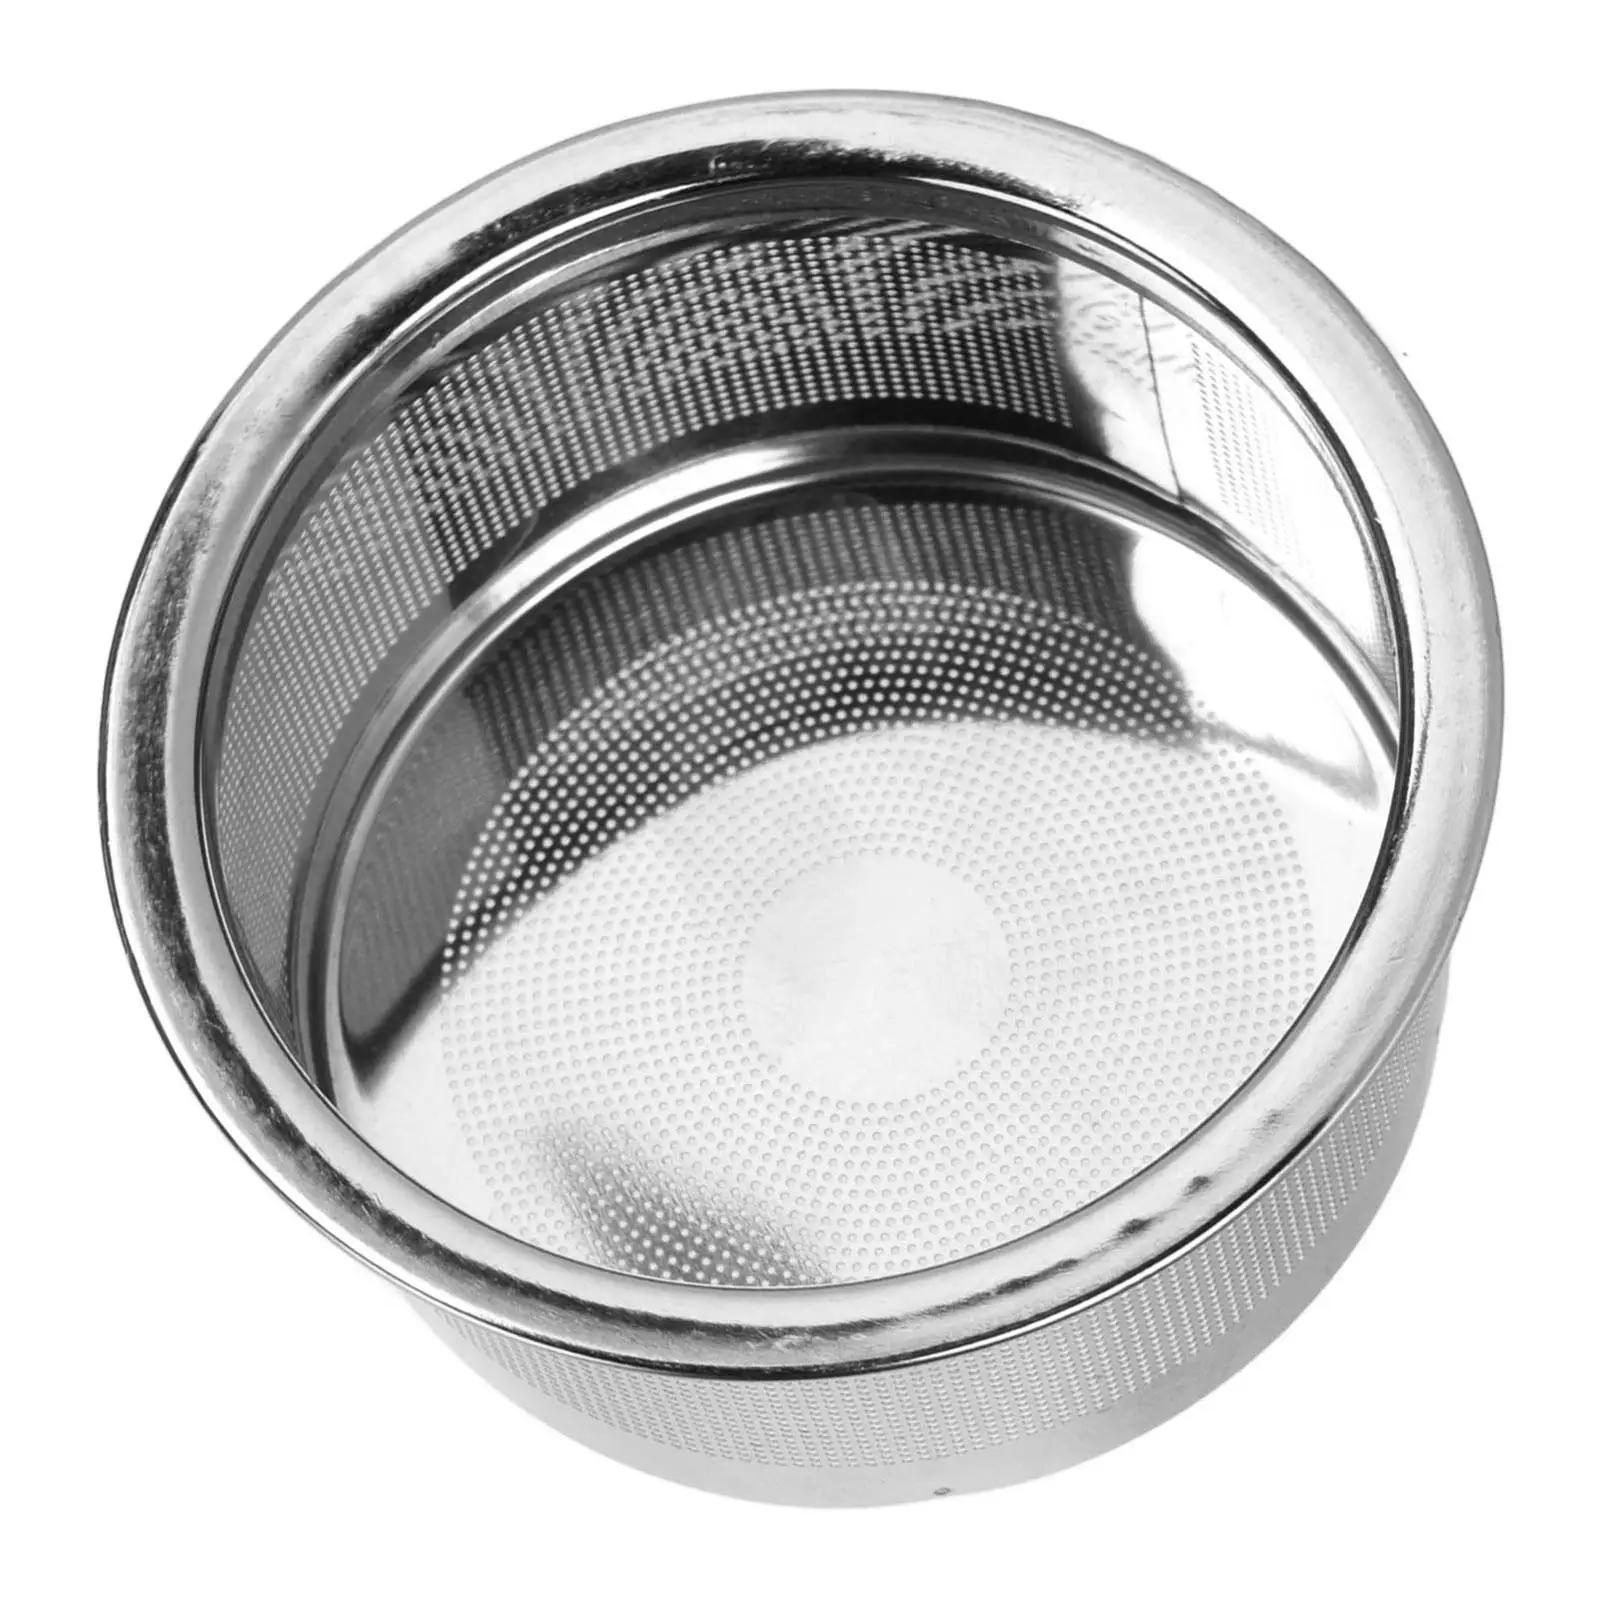 Watch Cleaner Basket Good Helper Premium Materials Small Portable for Watchmaker Excellent Airtightness Small Parts Mesh Holder